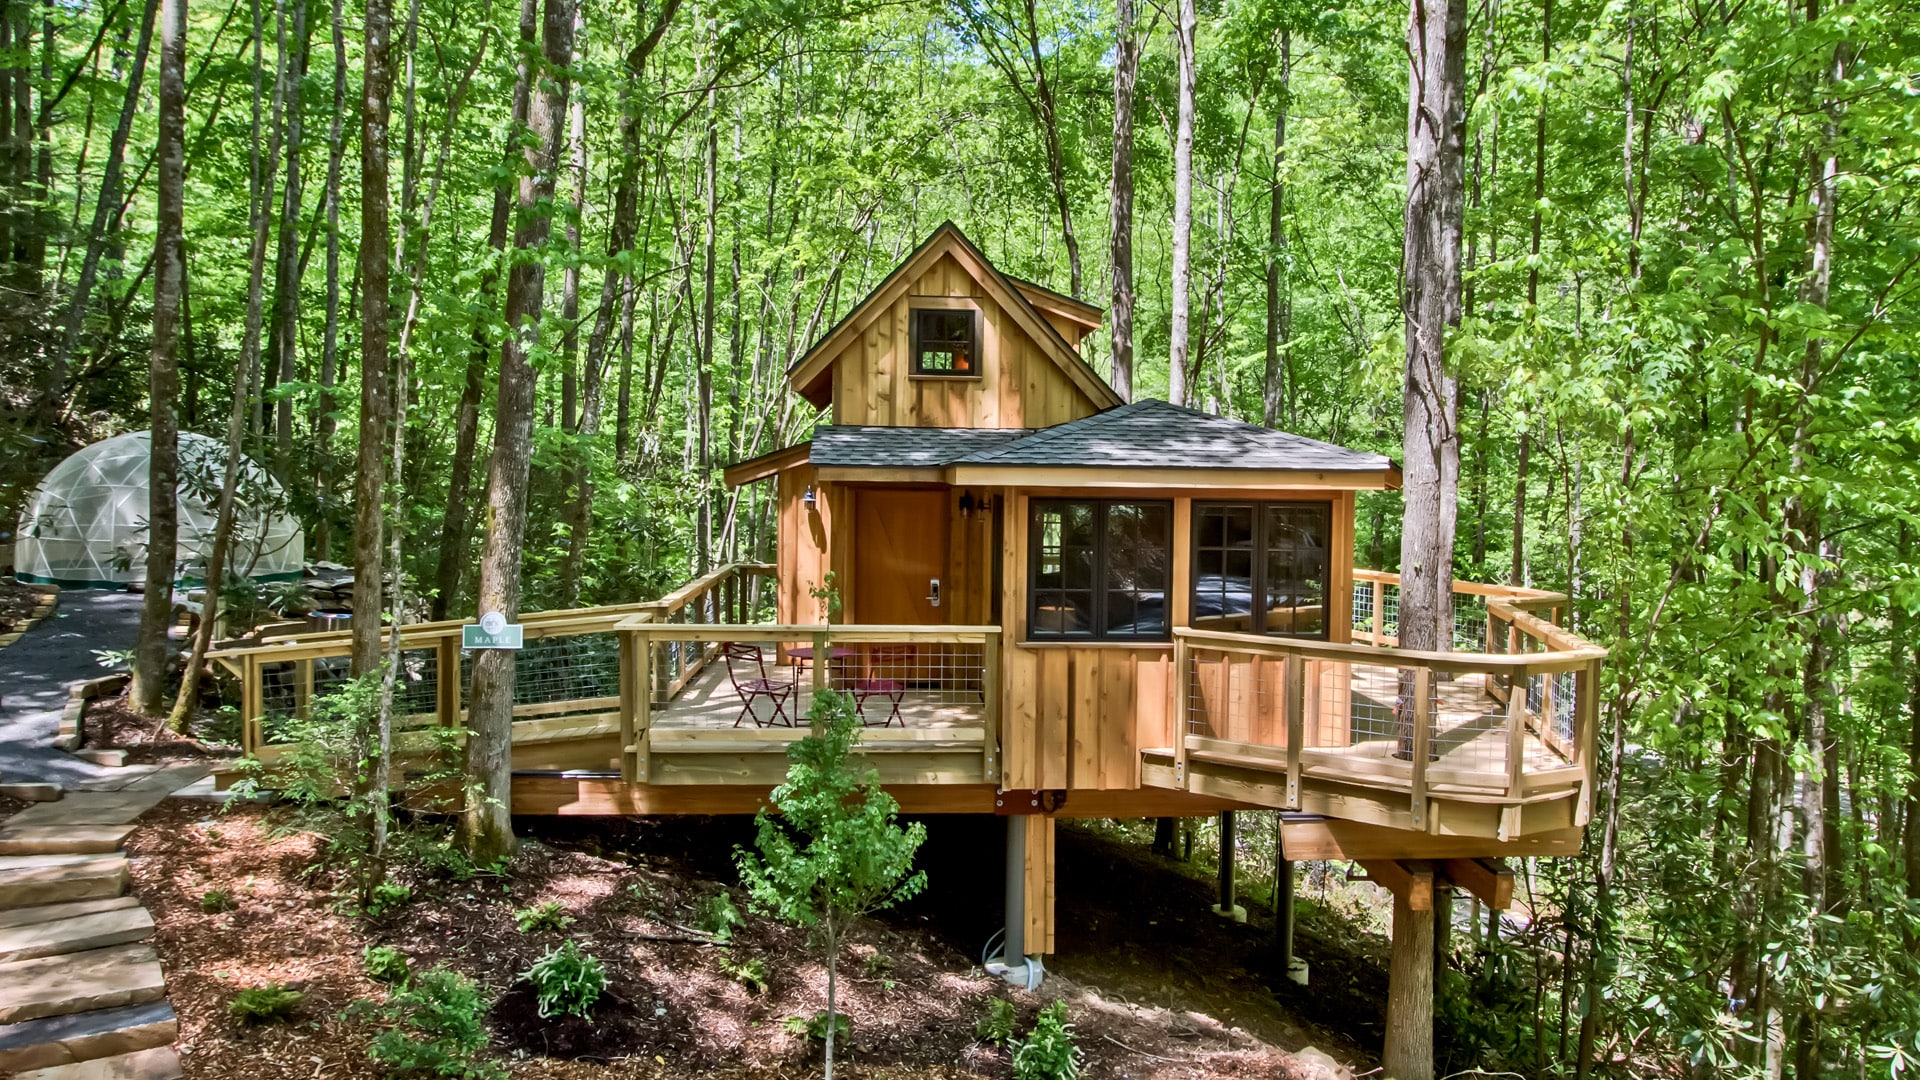 Plan the Perfect Smoky Mountain Vacation